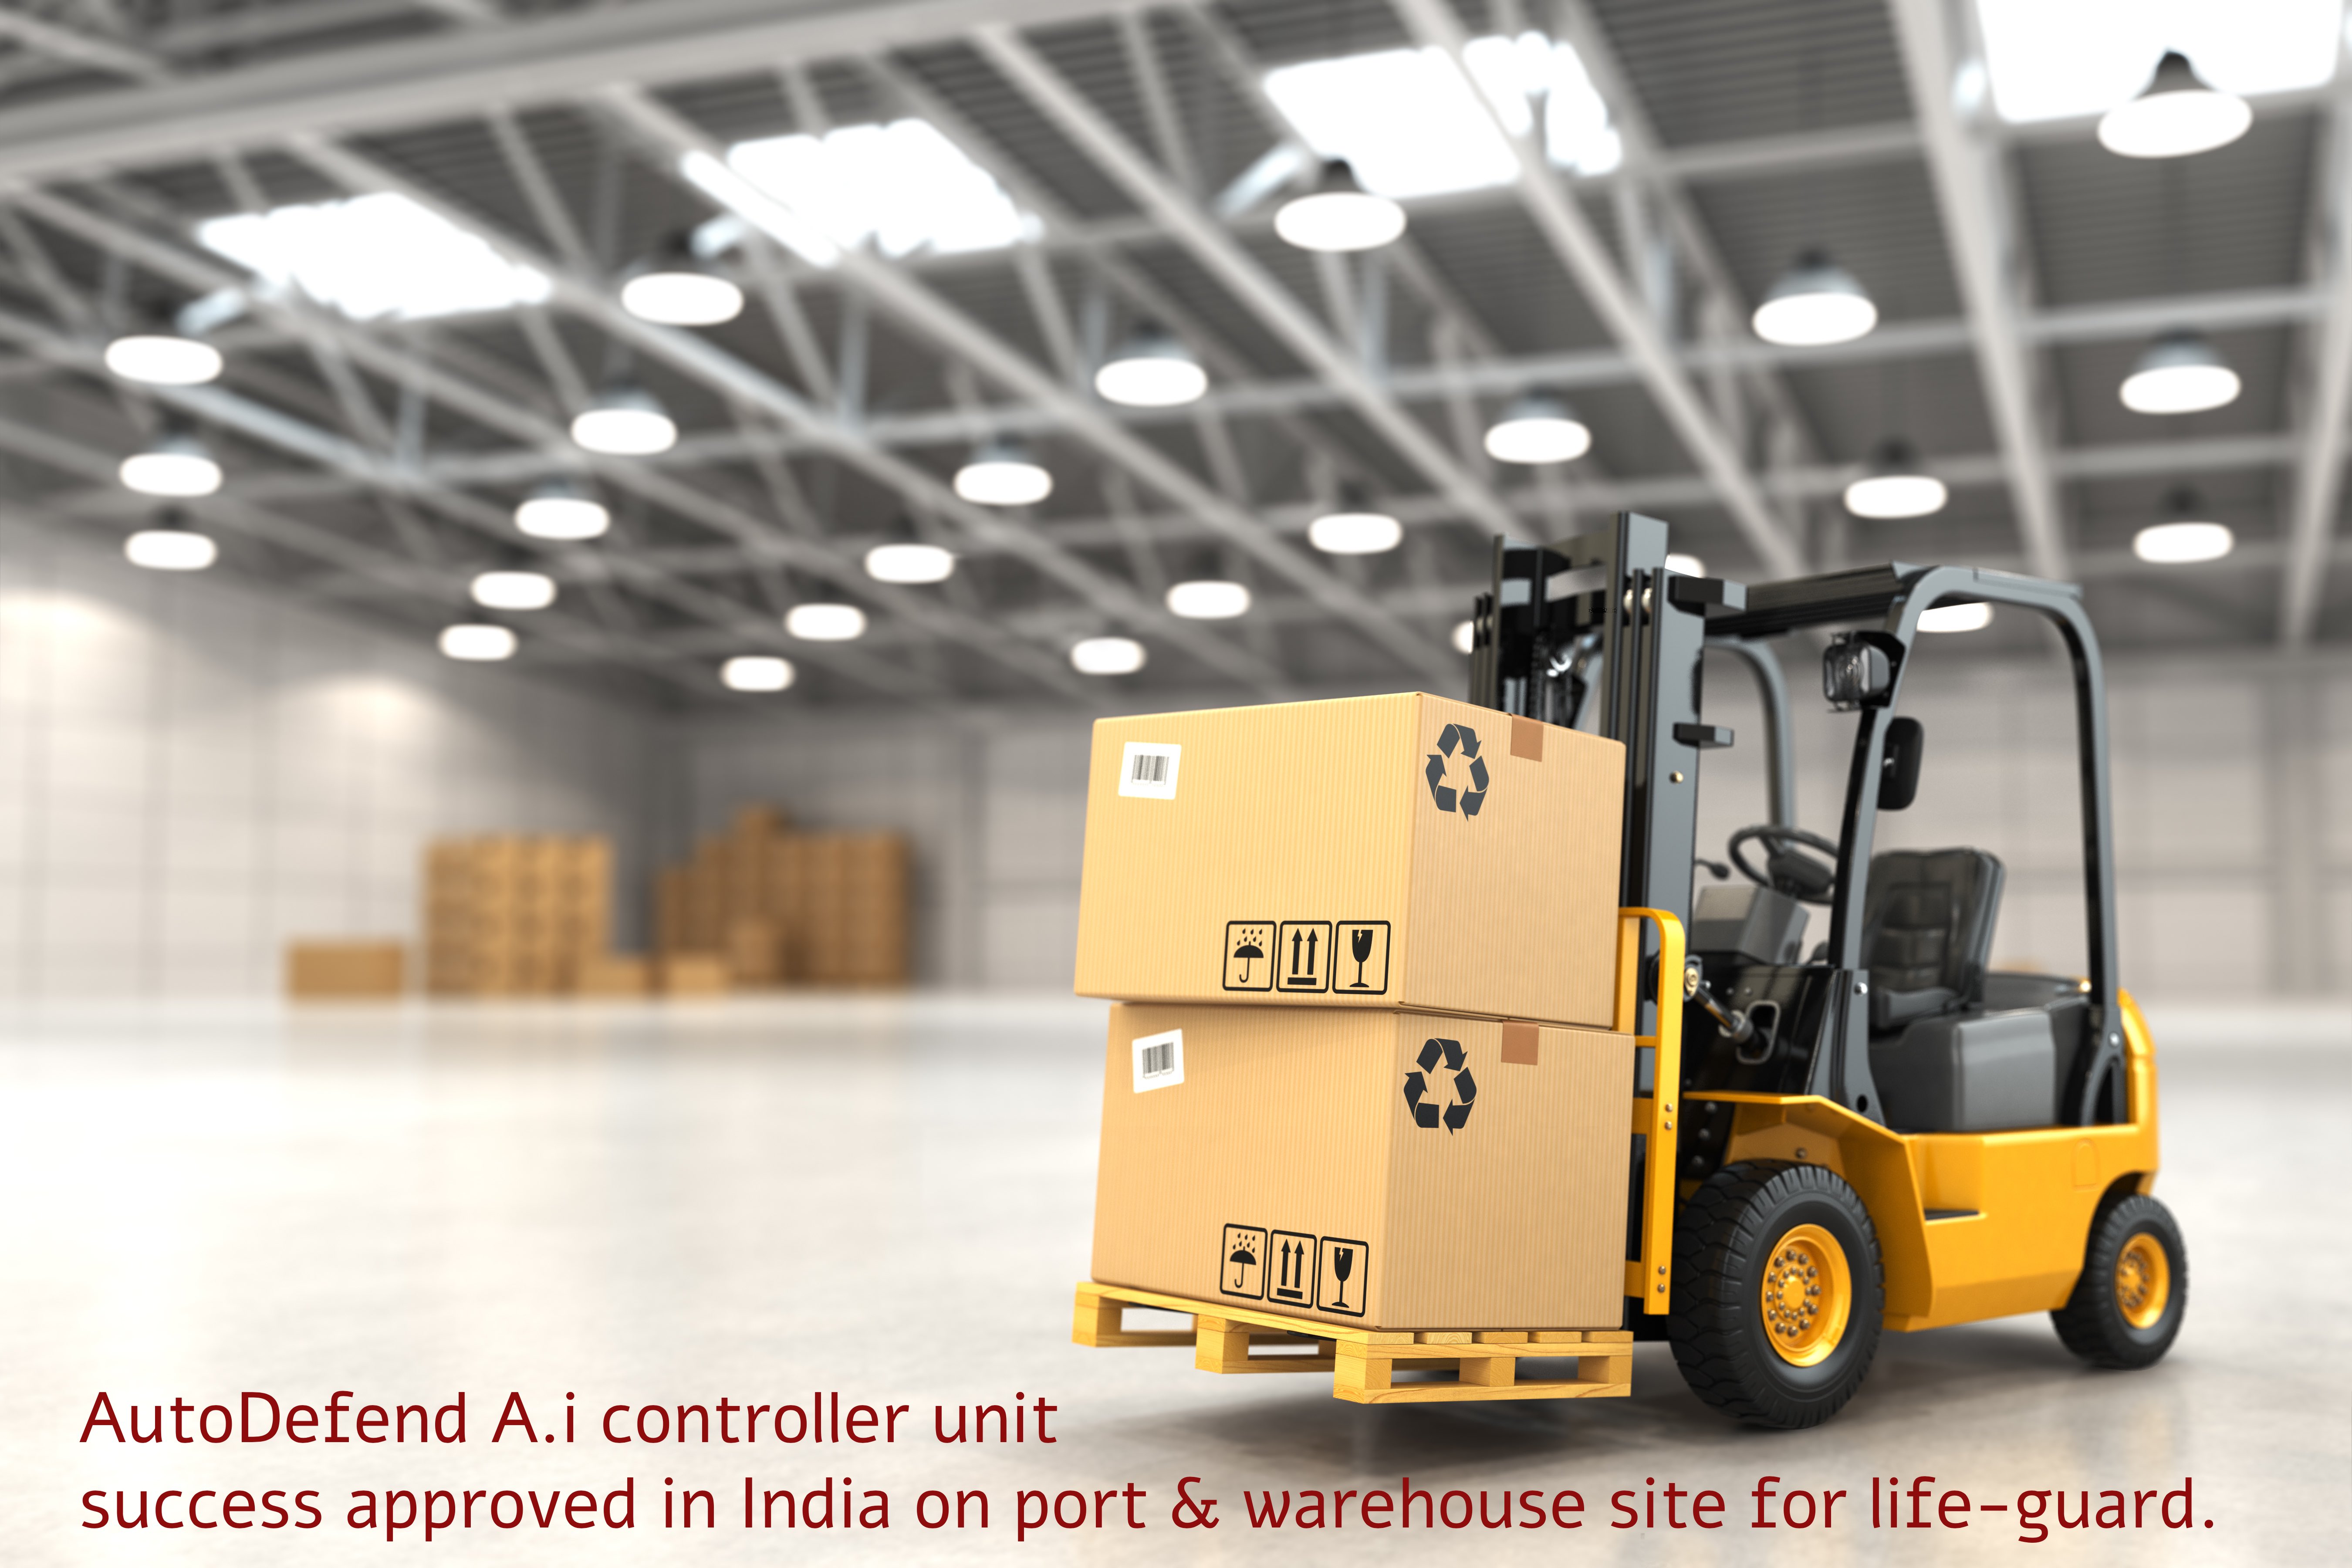 AutoDefend A.i controller unit success approved in India on port & warehouse site for life-guard.